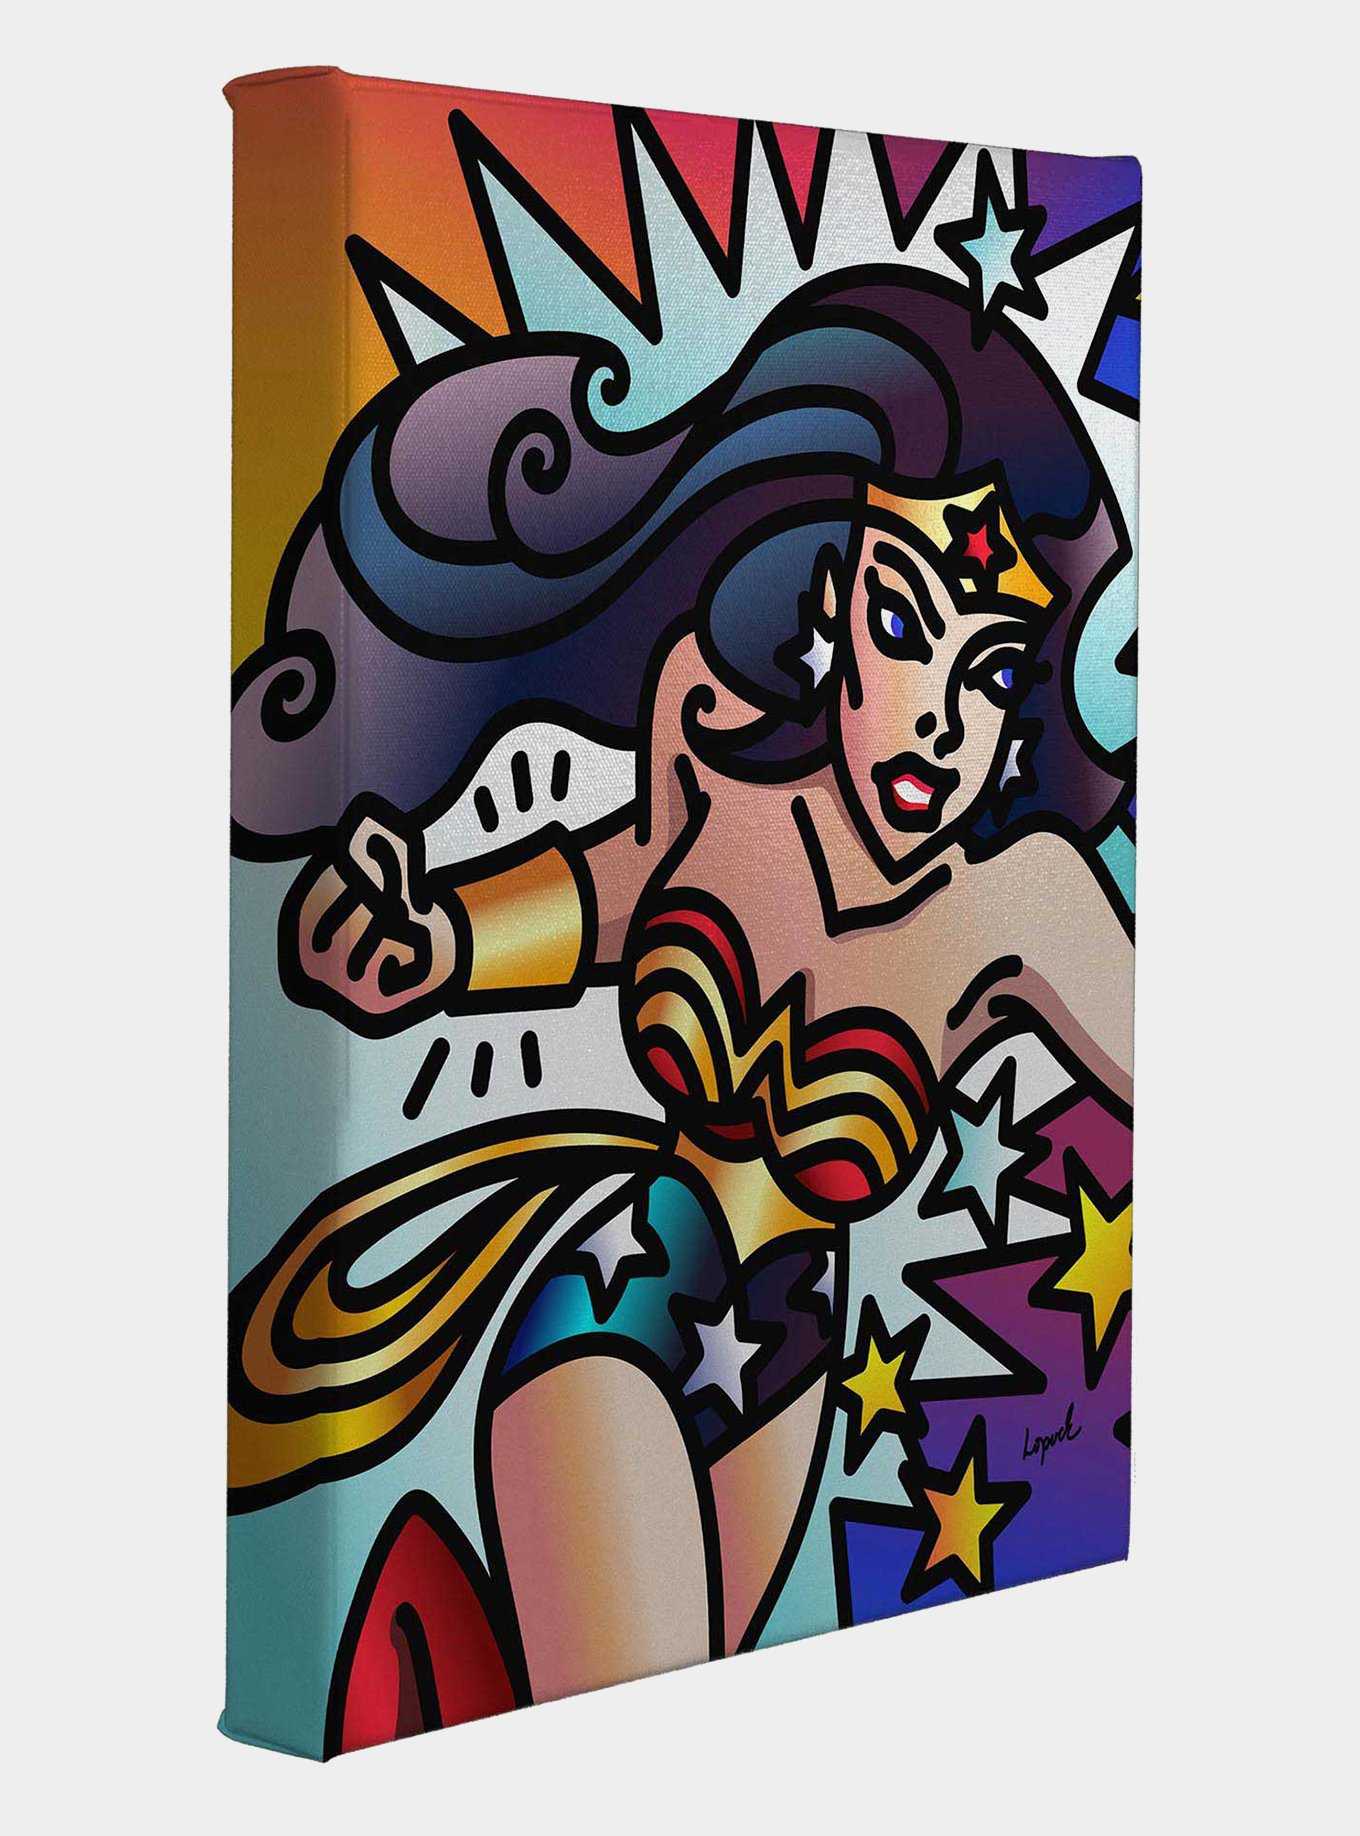 DC Comics Wonder Woman By Lisa Lopuck Gallery Wrapped Canvas, , hi-res